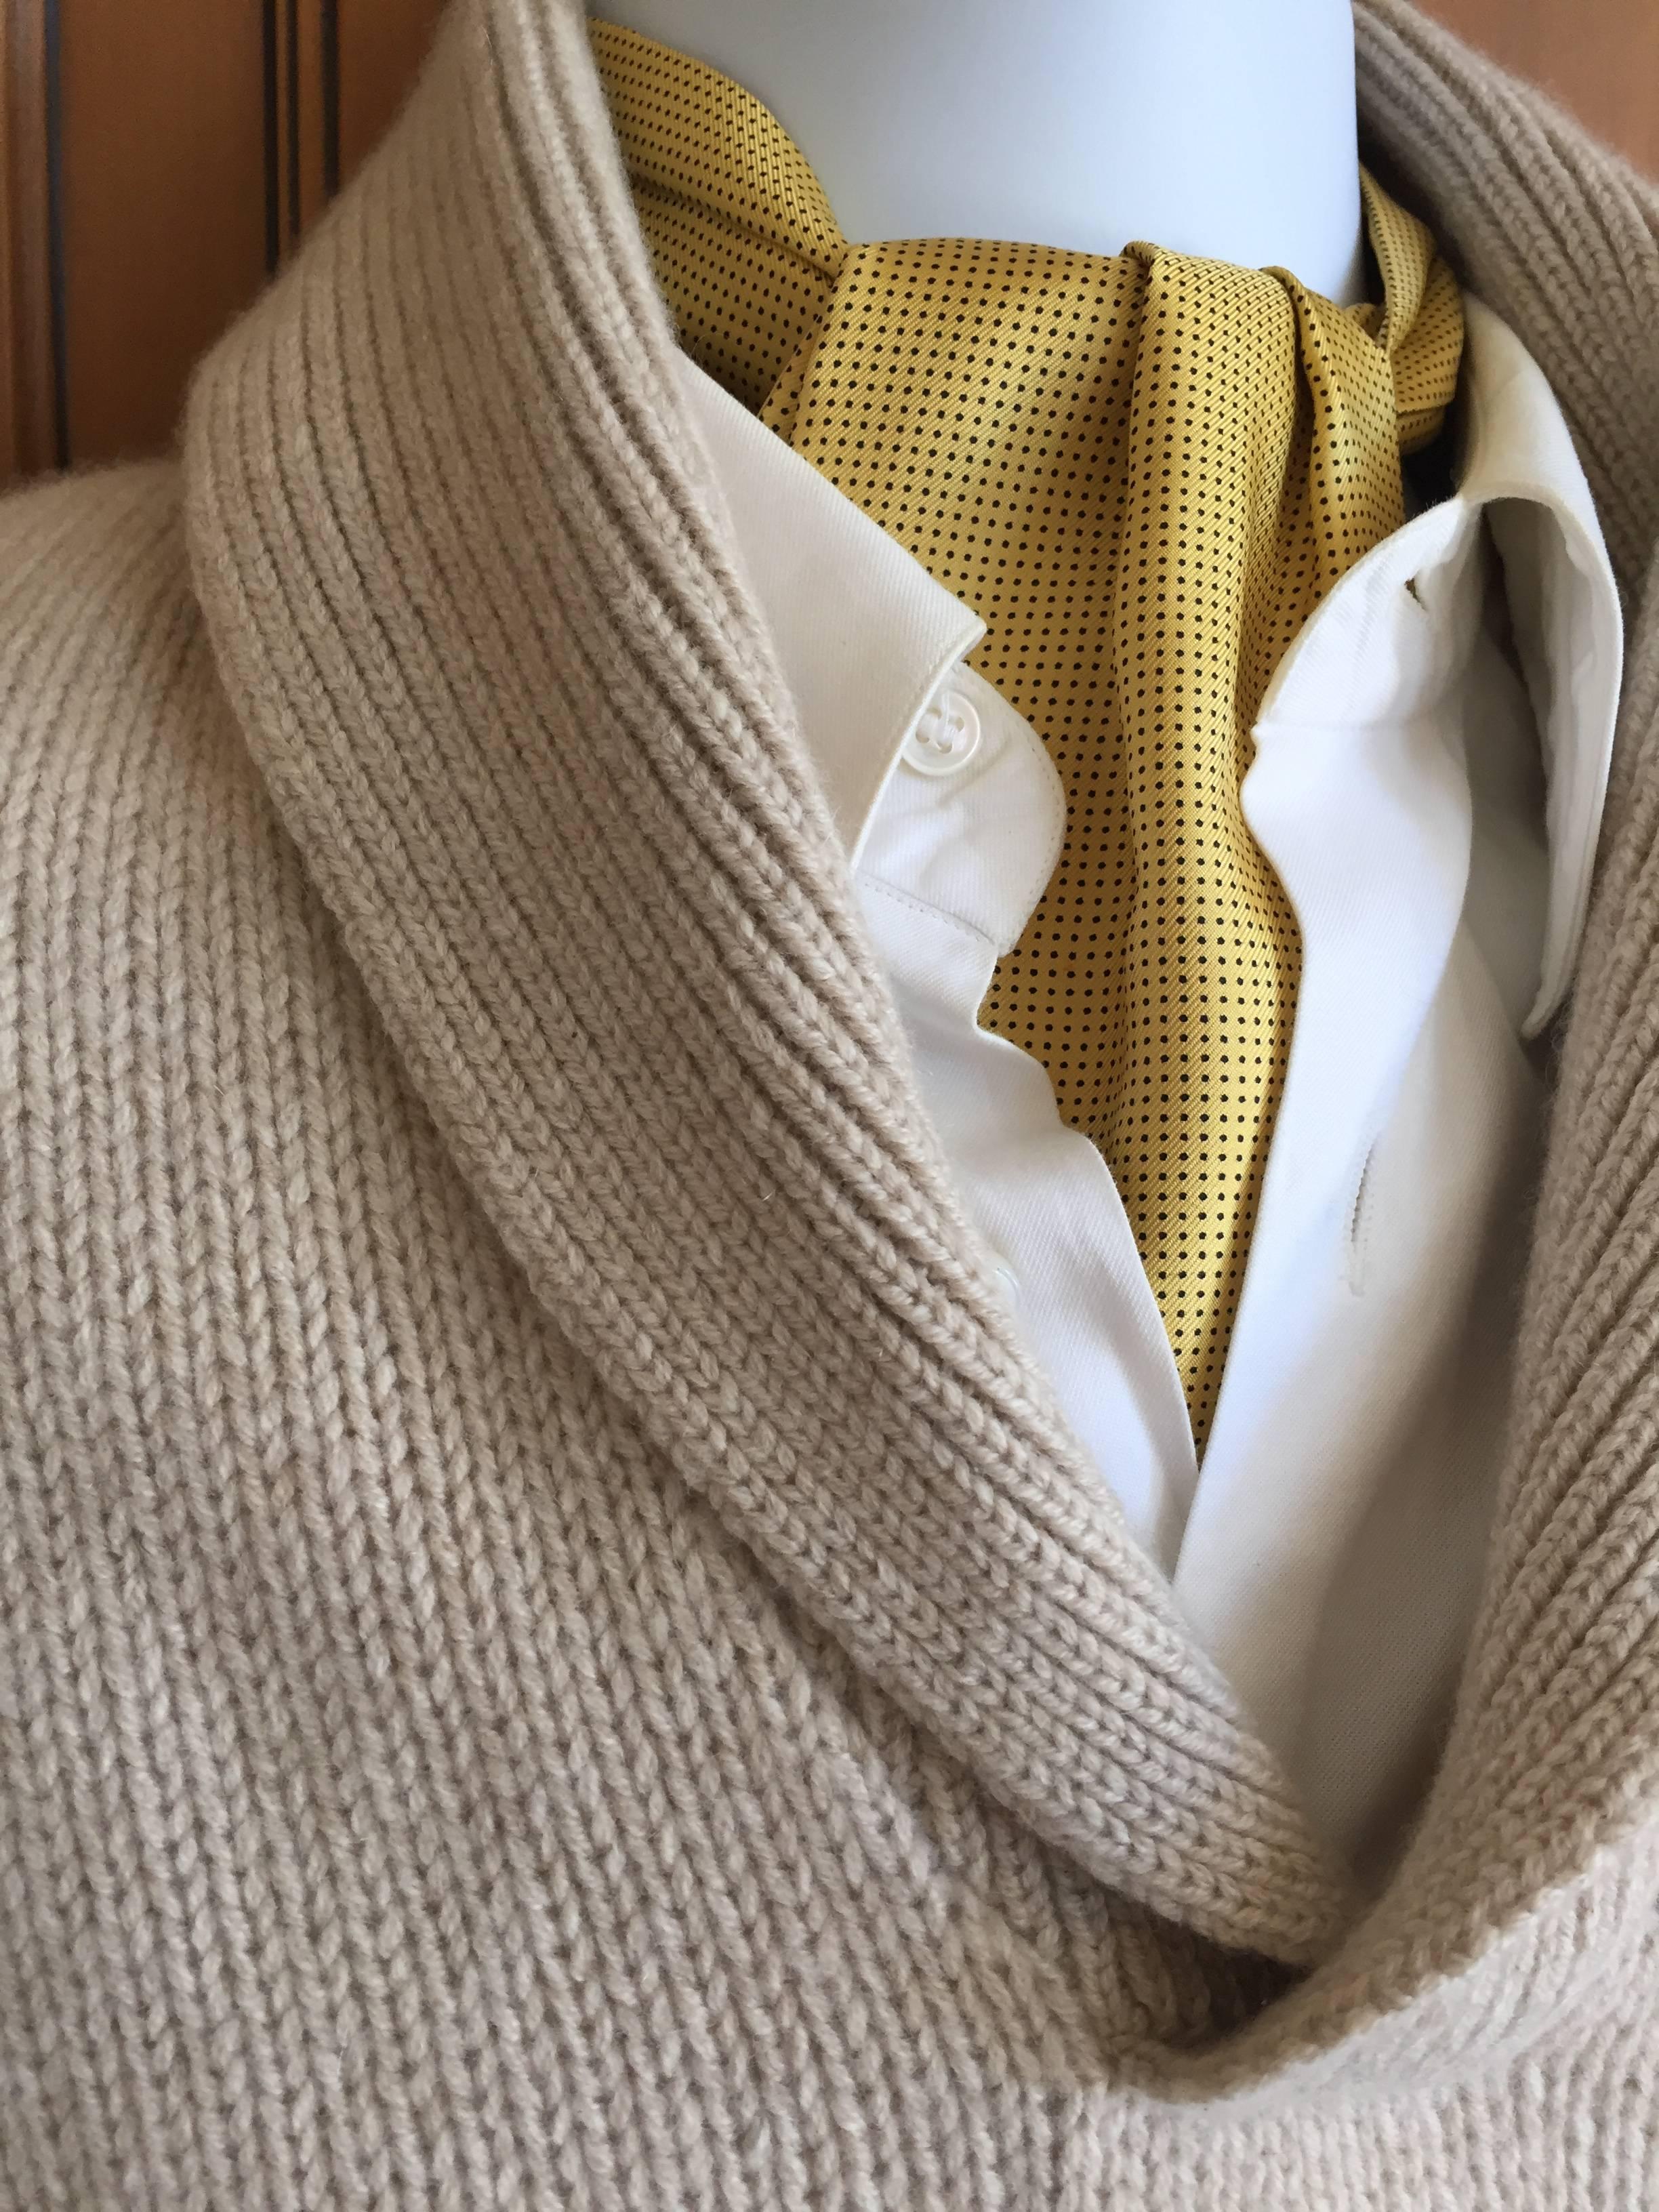 Loro Piana Gentlemans Baby Cashmere Shawl Collar Sweater.
Super luxurious pure baby cashmere shawl collar sweater in oatmeal.
This is a loose weave and feels divine.
Retail was $2200
Marked size 54 (US 44)
Chest 48